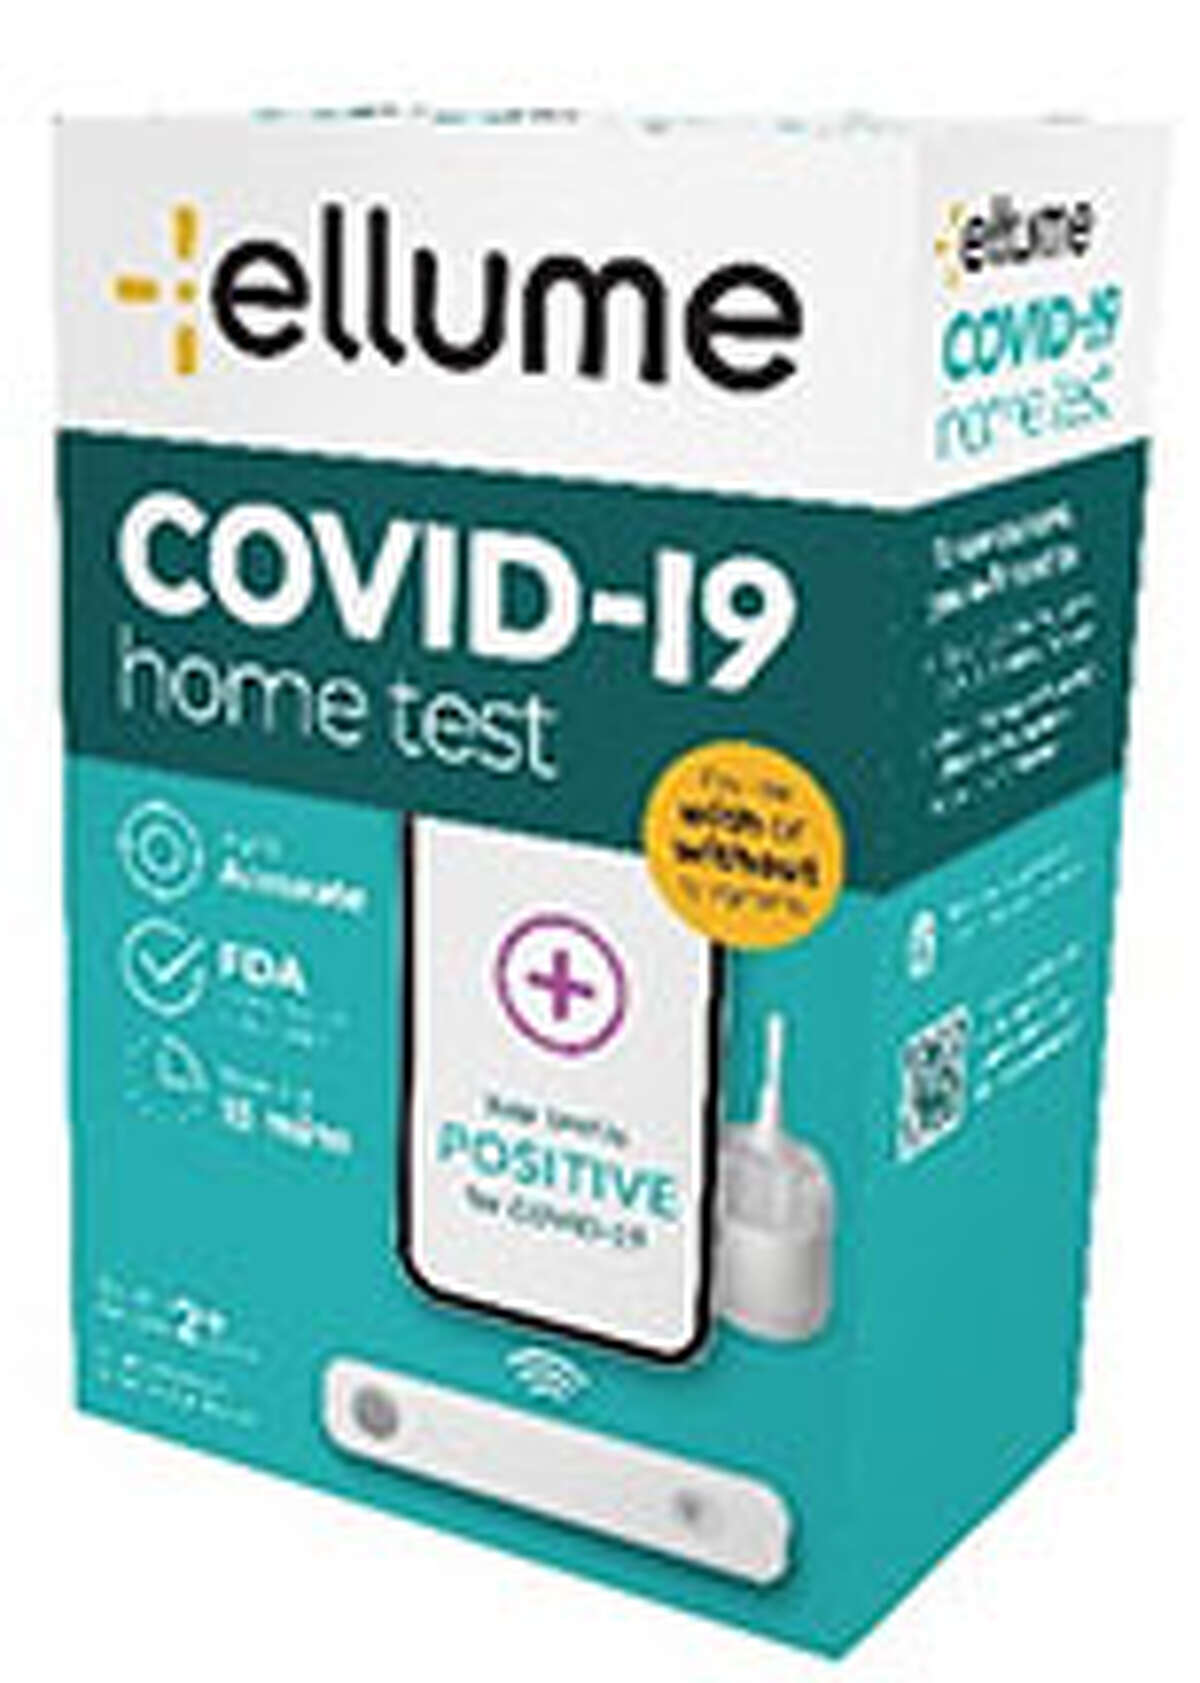 The Ellume at-home COVID-19 test which has been voluntarily recalled.